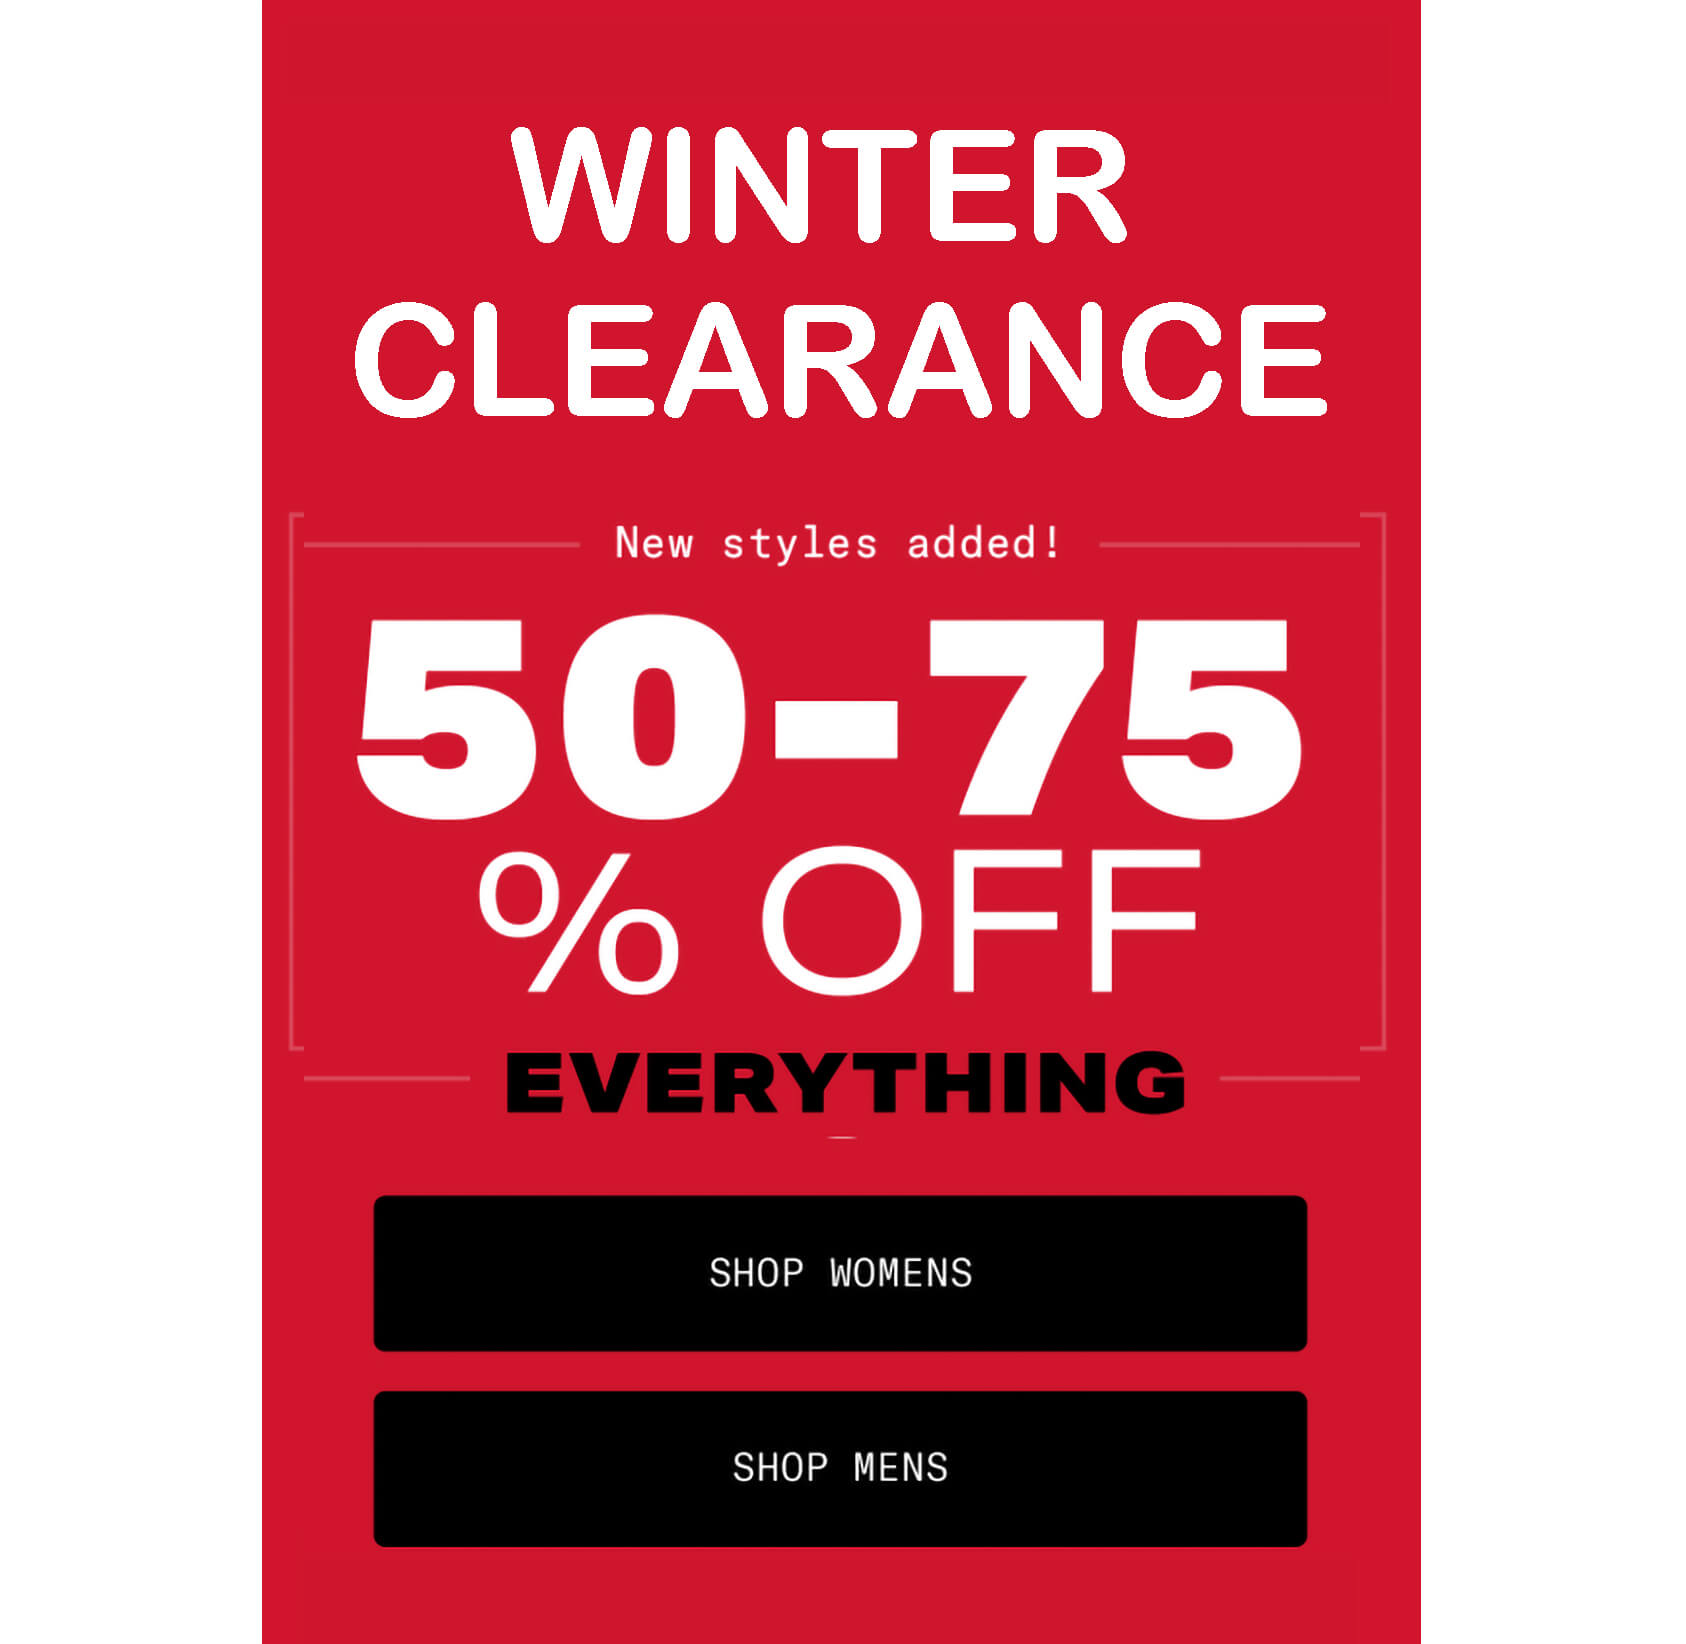 Stock Clearance Sales Email Examples